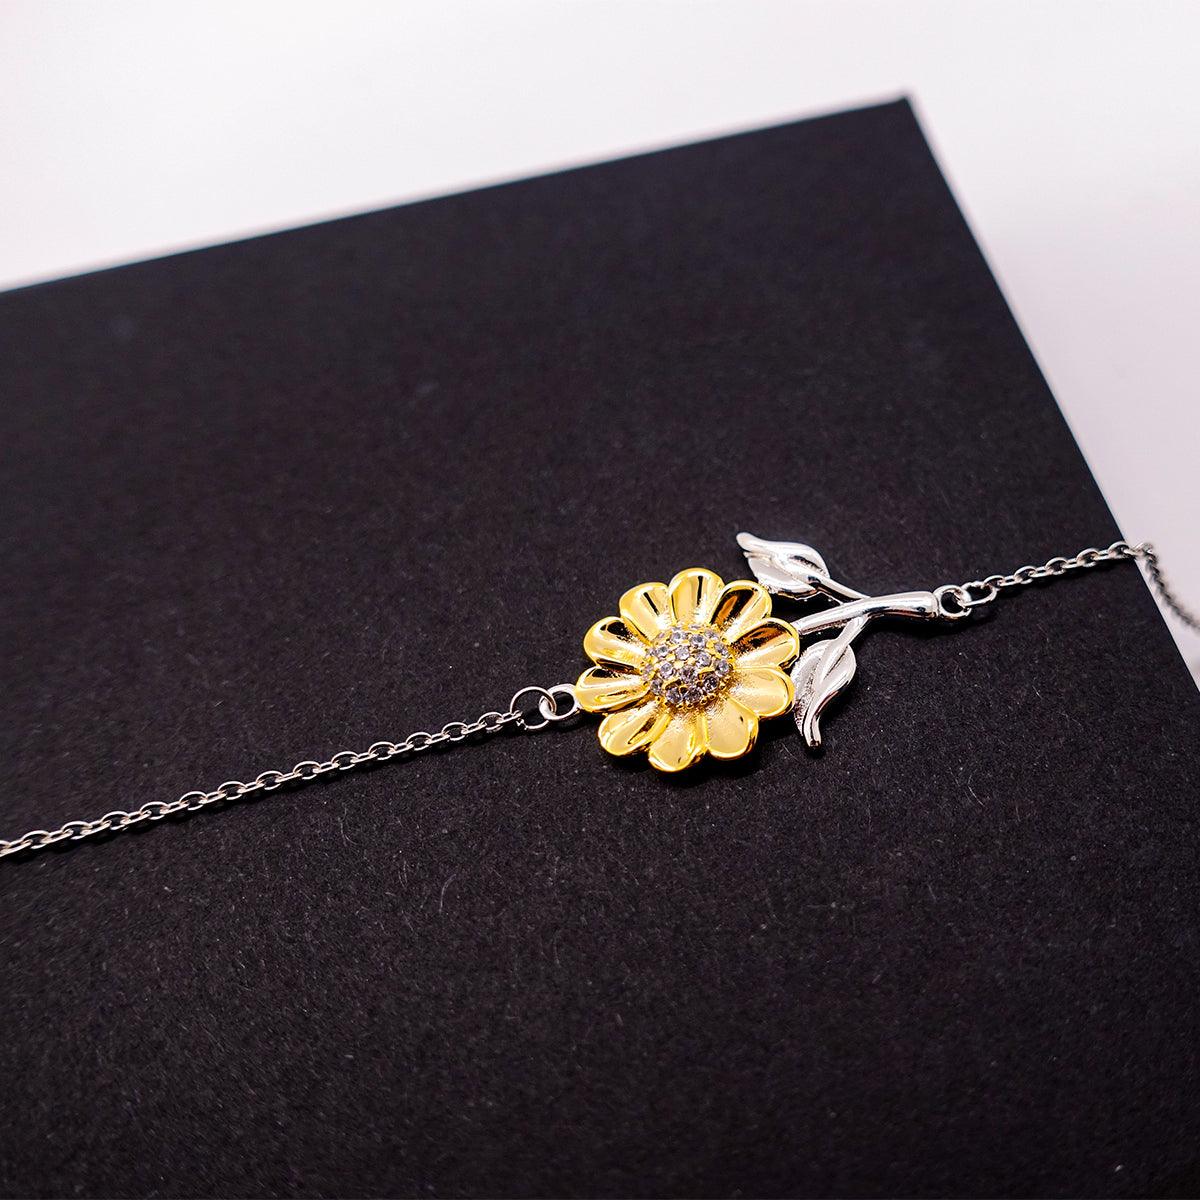 Brother In Law Sunflower Bracelet - Always follow your dreams, never forget how amazing you are, Birthday. Christmas Gifts Jewelry - Mallard Moon Gift Shop